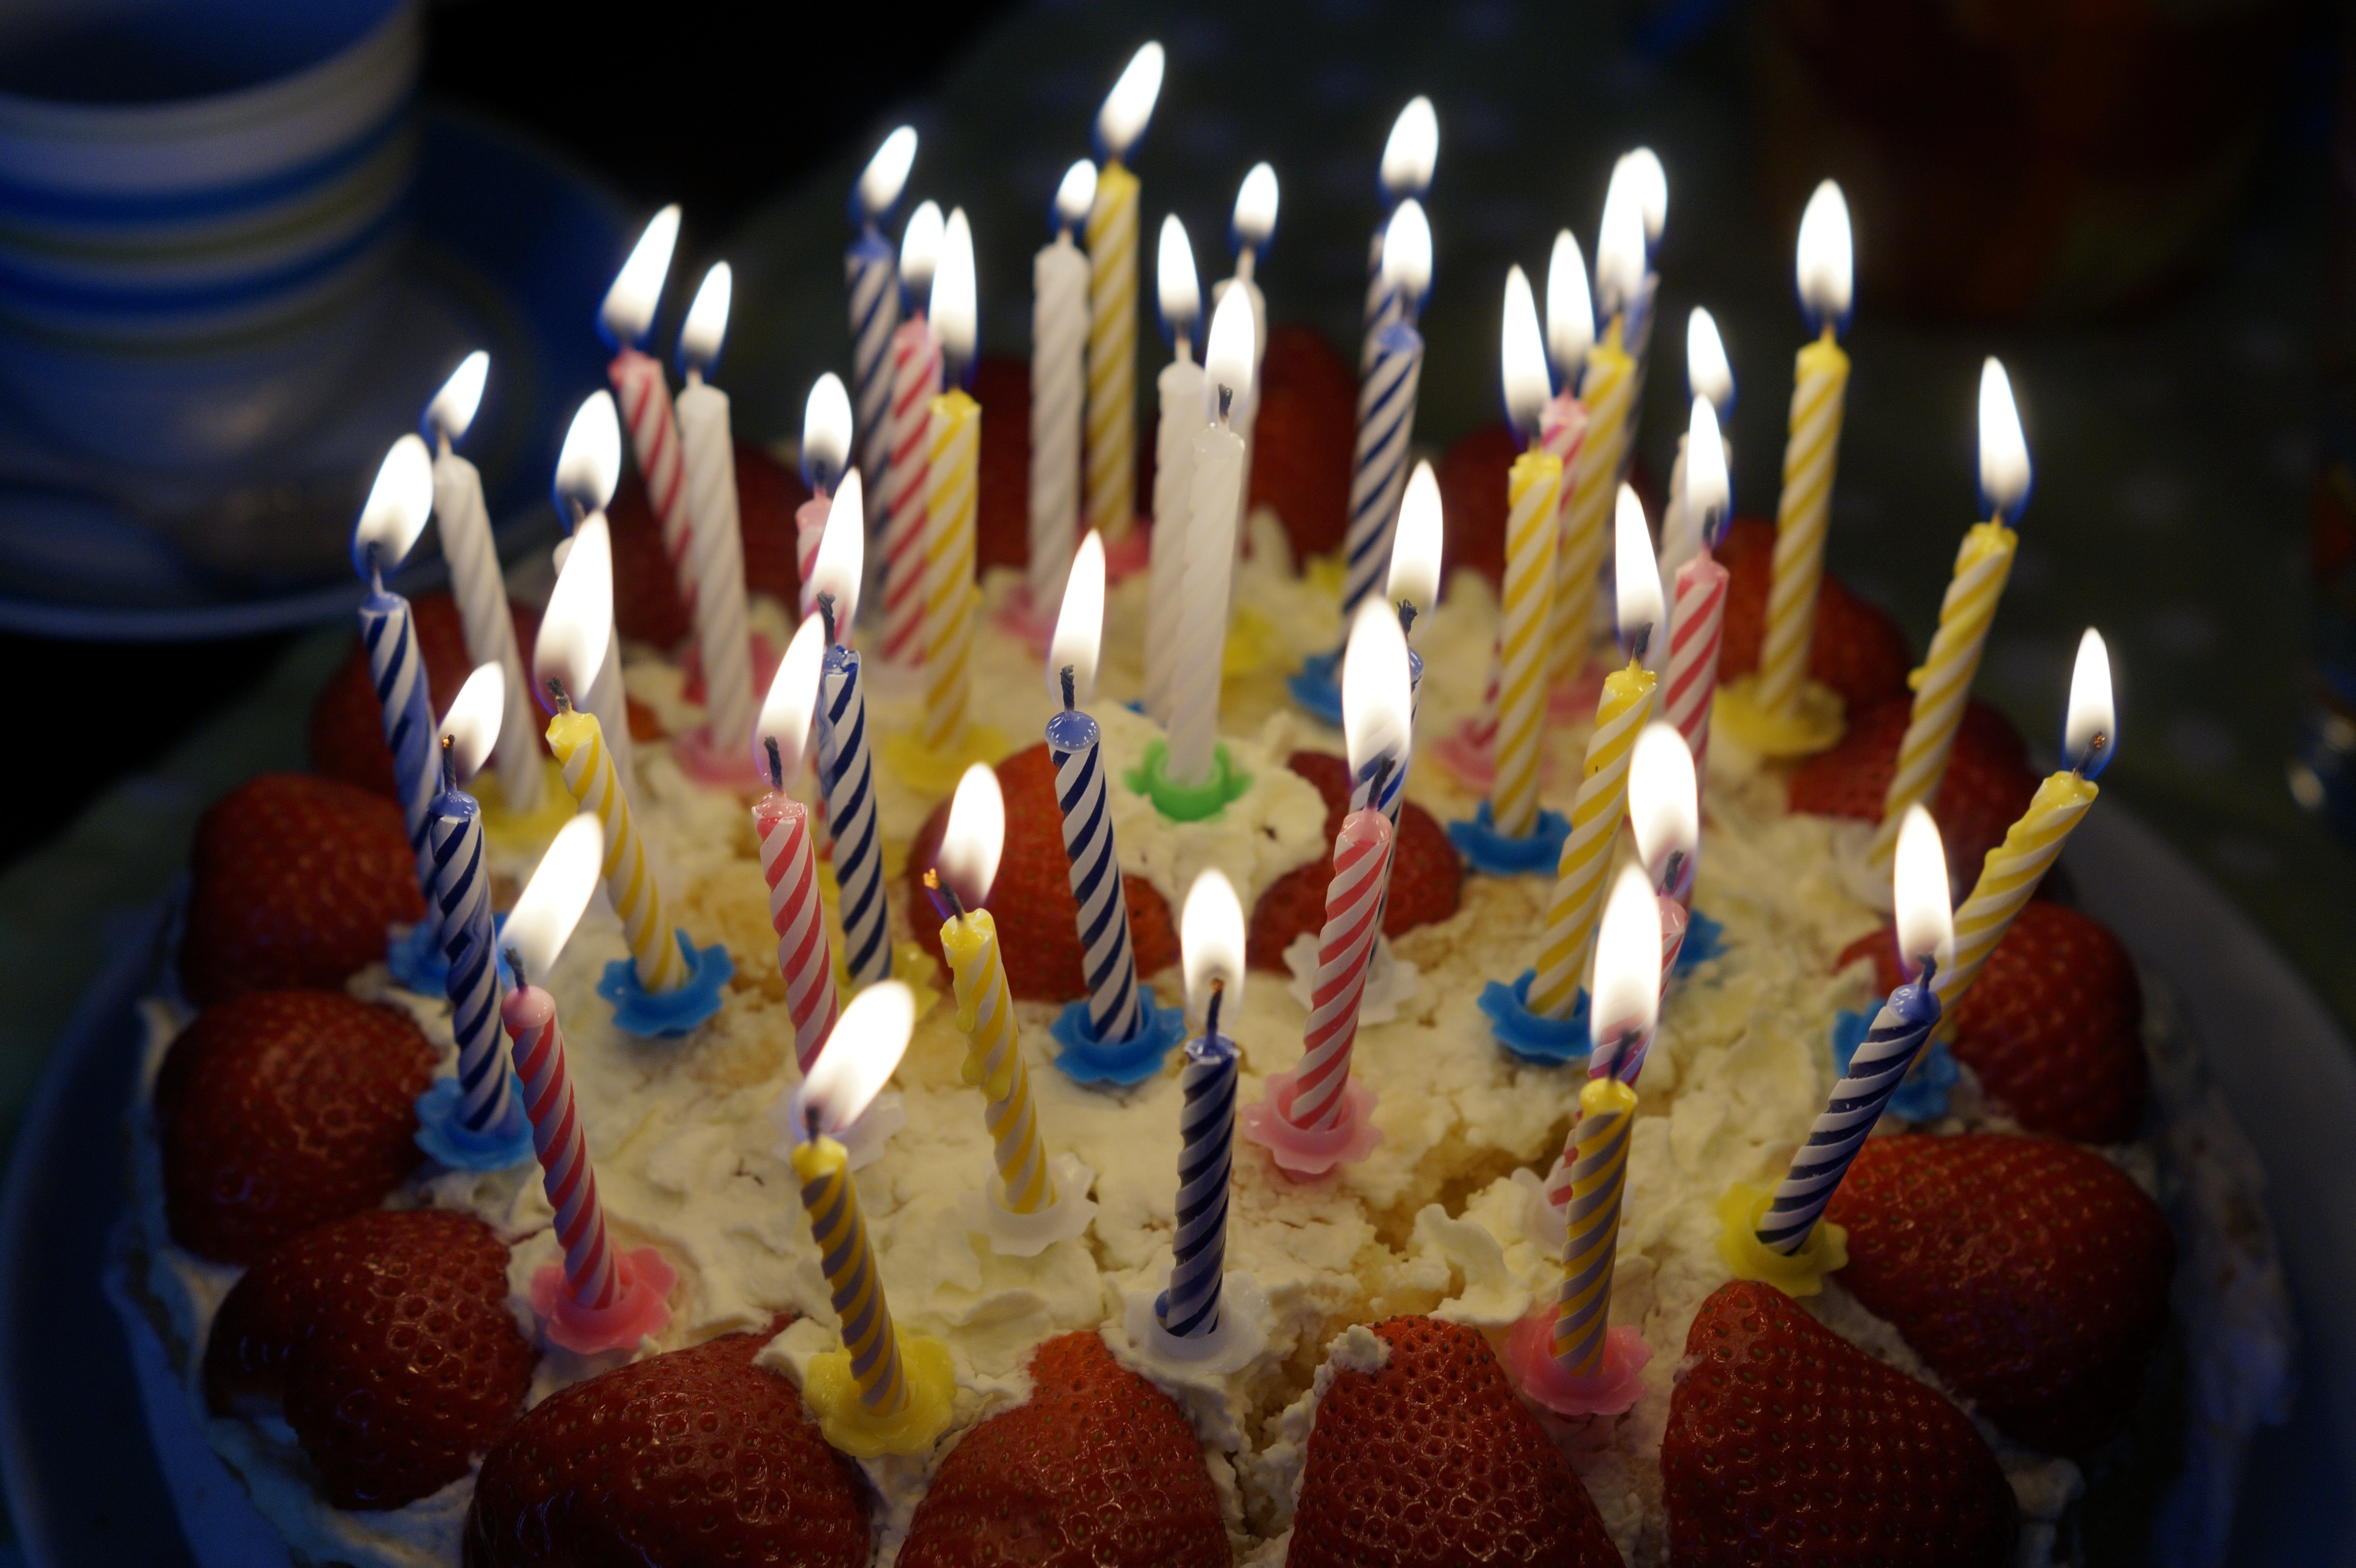 Birthday Cake Burn Candles Candle Food And Drink Free Image Peakpx